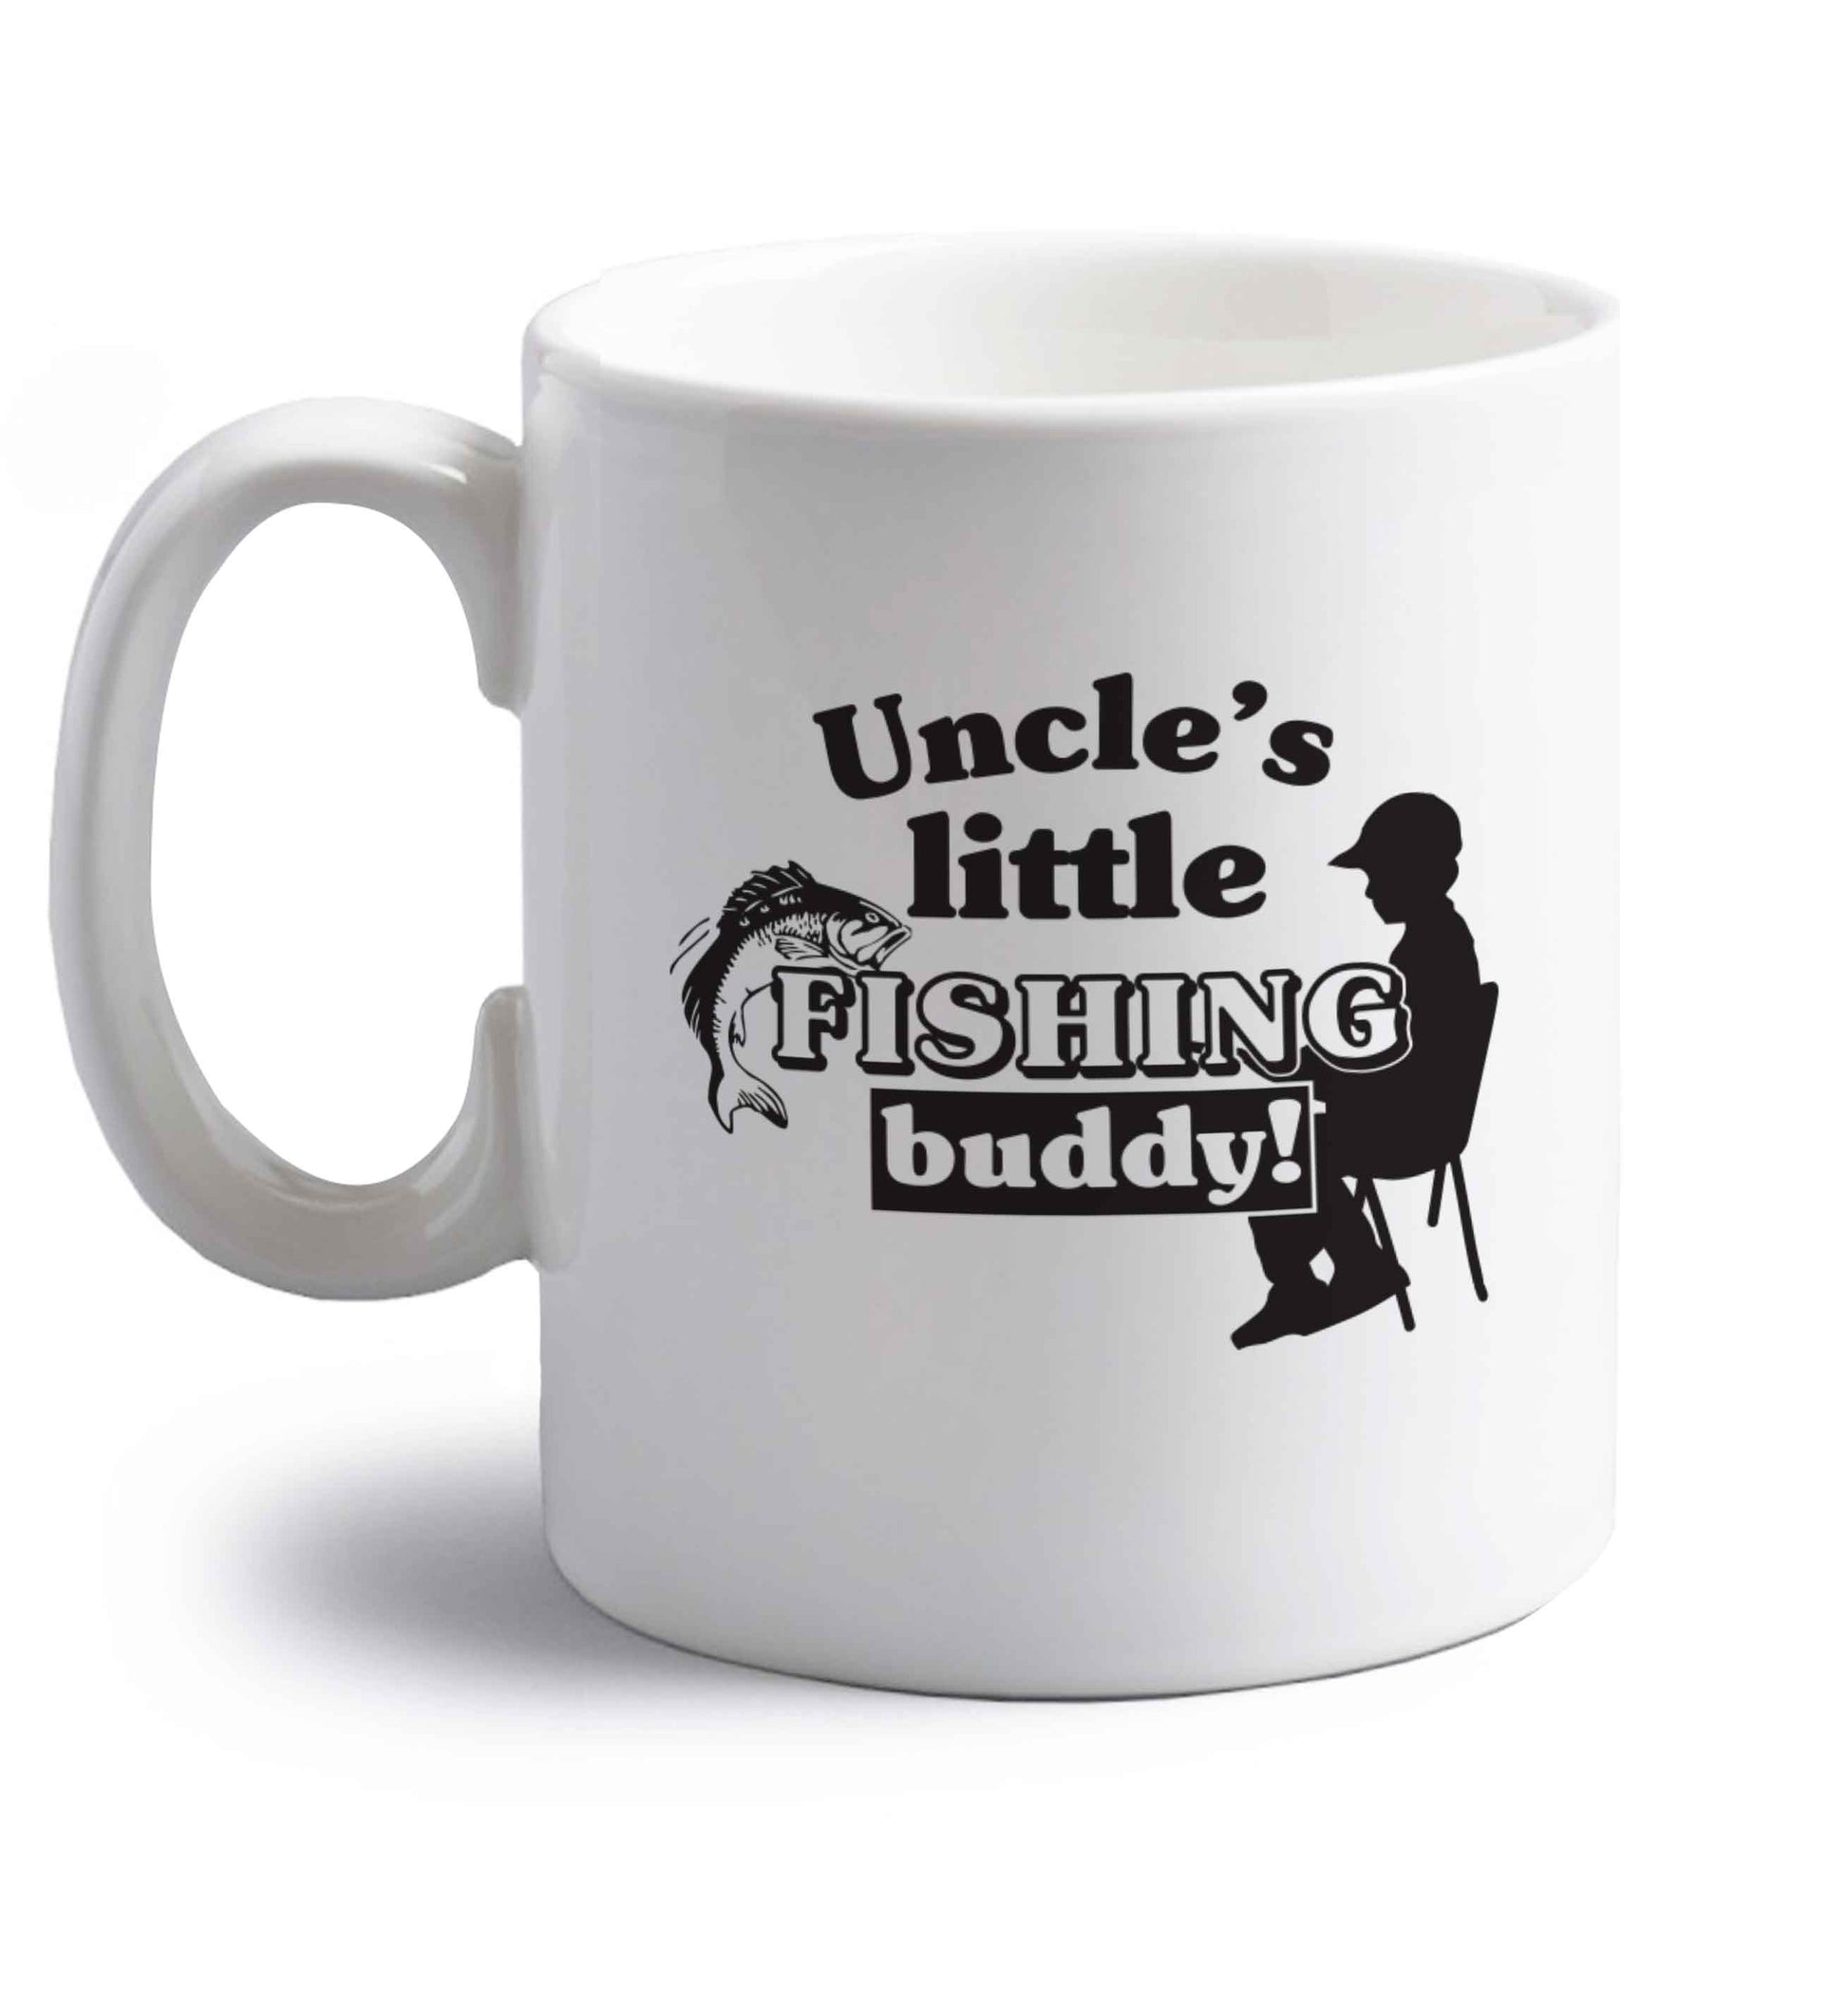 Uncle's little fishing buddy right handed white ceramic mug 